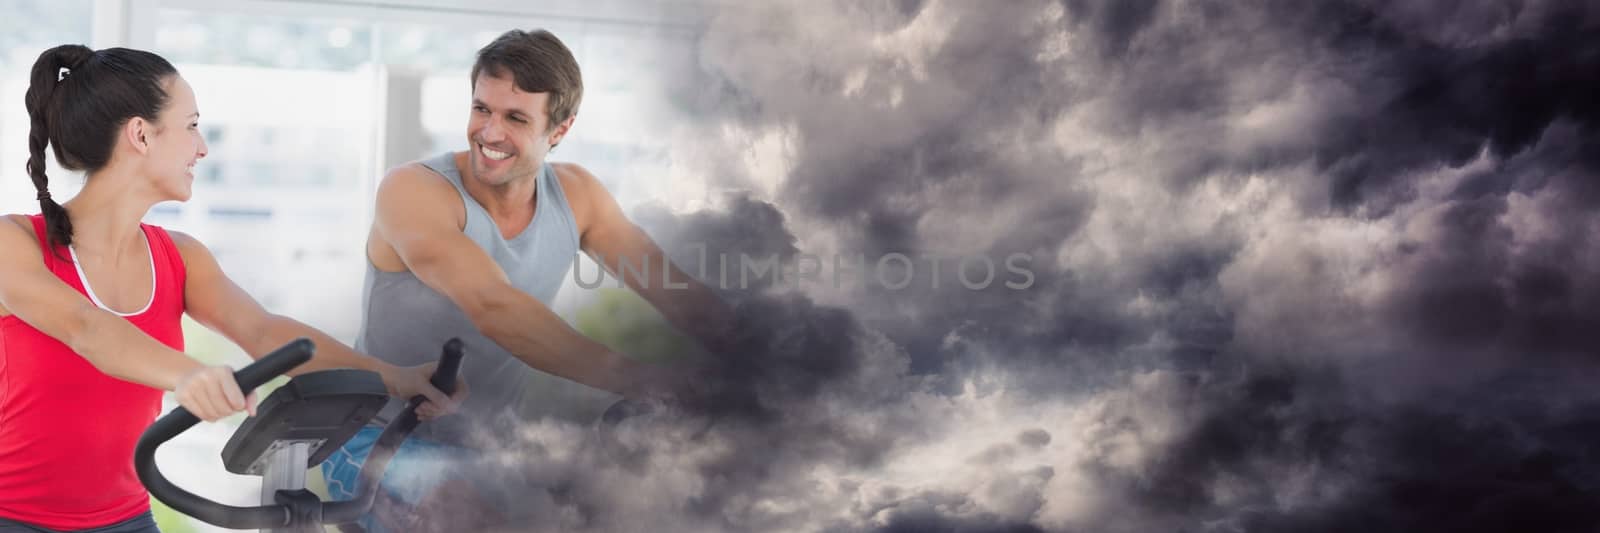 People smiling on gym bikes with stormy cloud transition by Wavebreakmedia